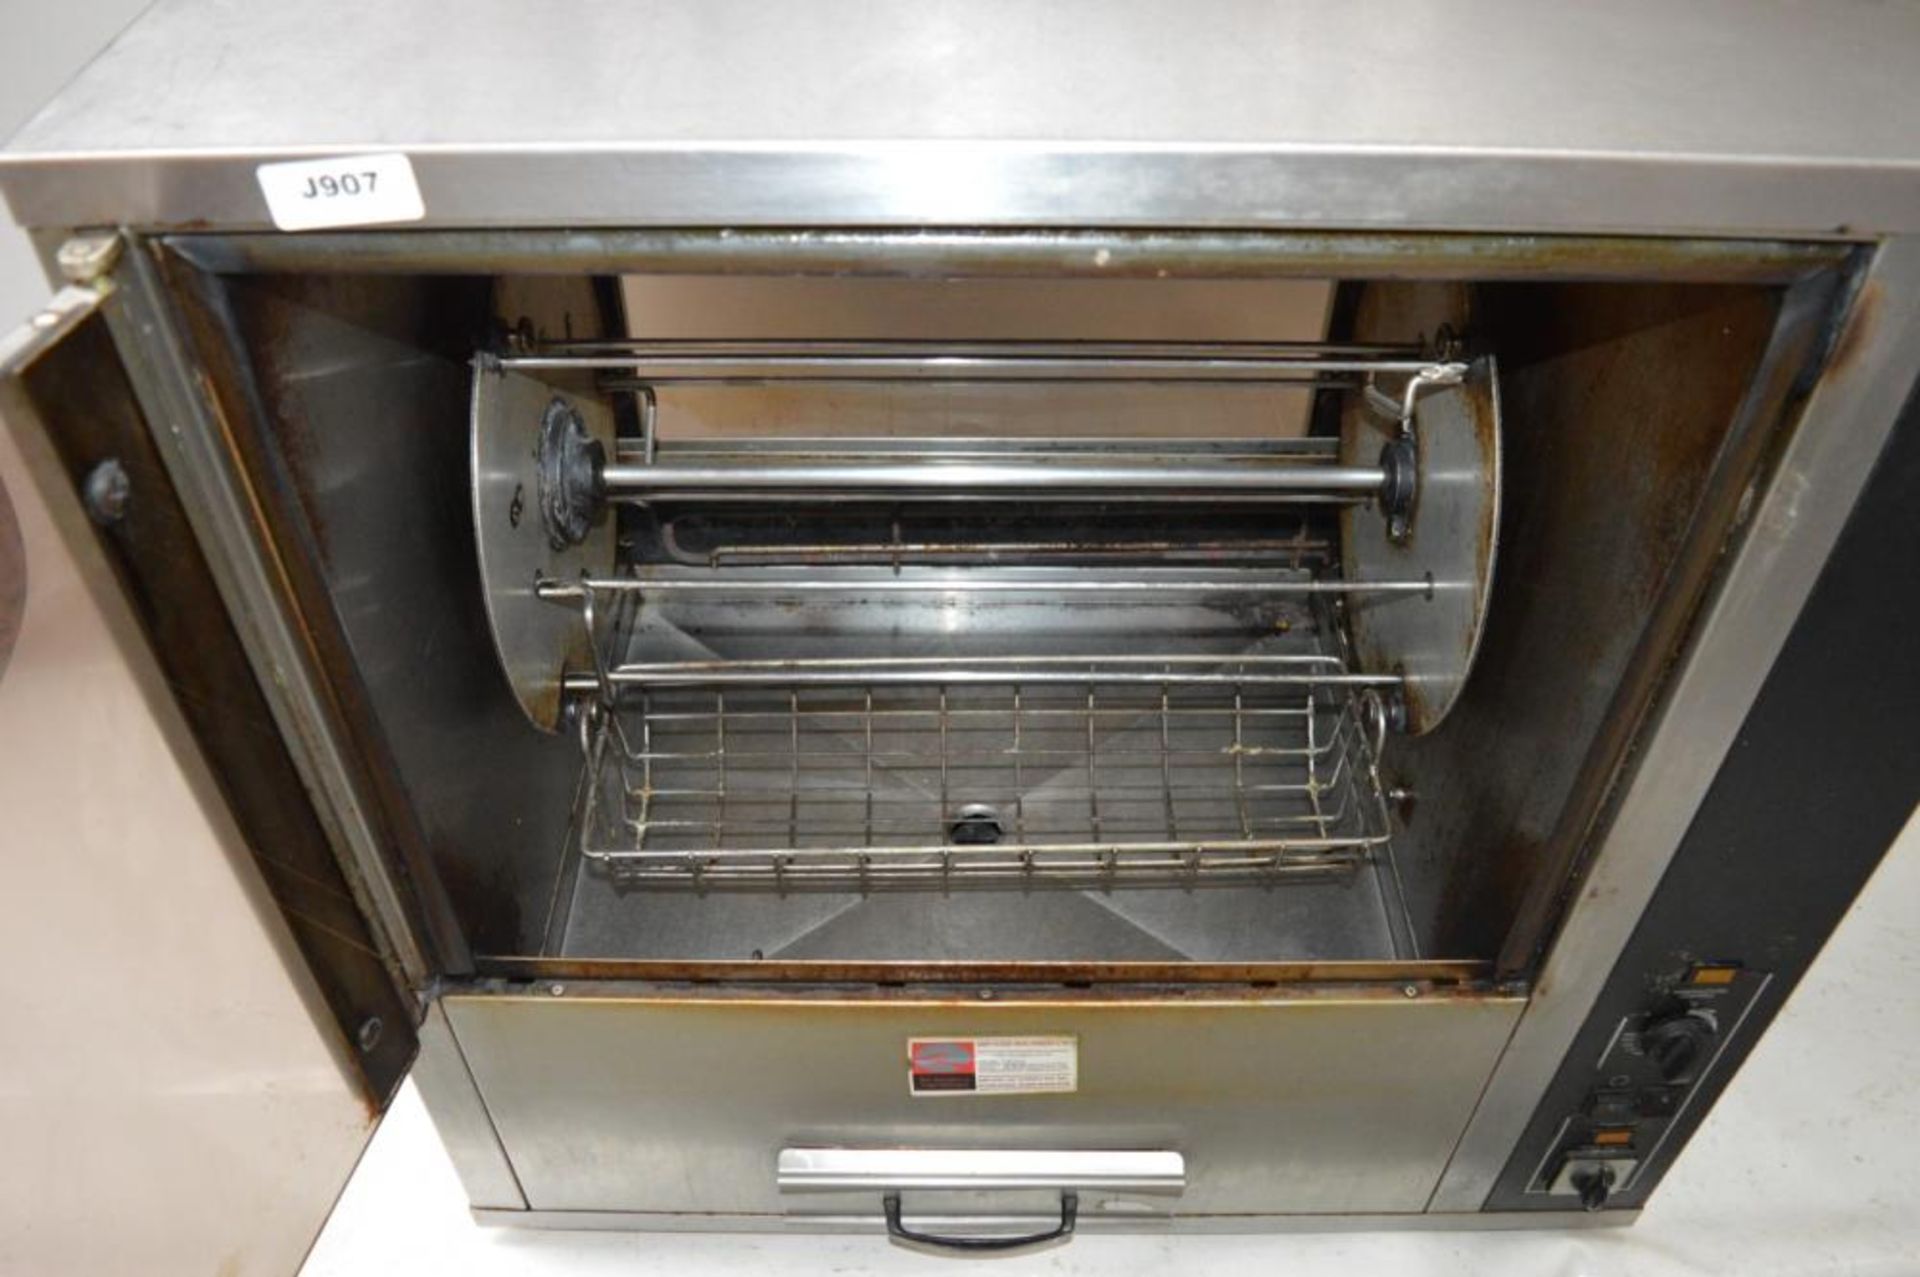 1 x Barbecue King Rotisserie Oven - Stainless Steel Finish - Ideal For Indoor or Outdoor Events - - Image 6 of 10